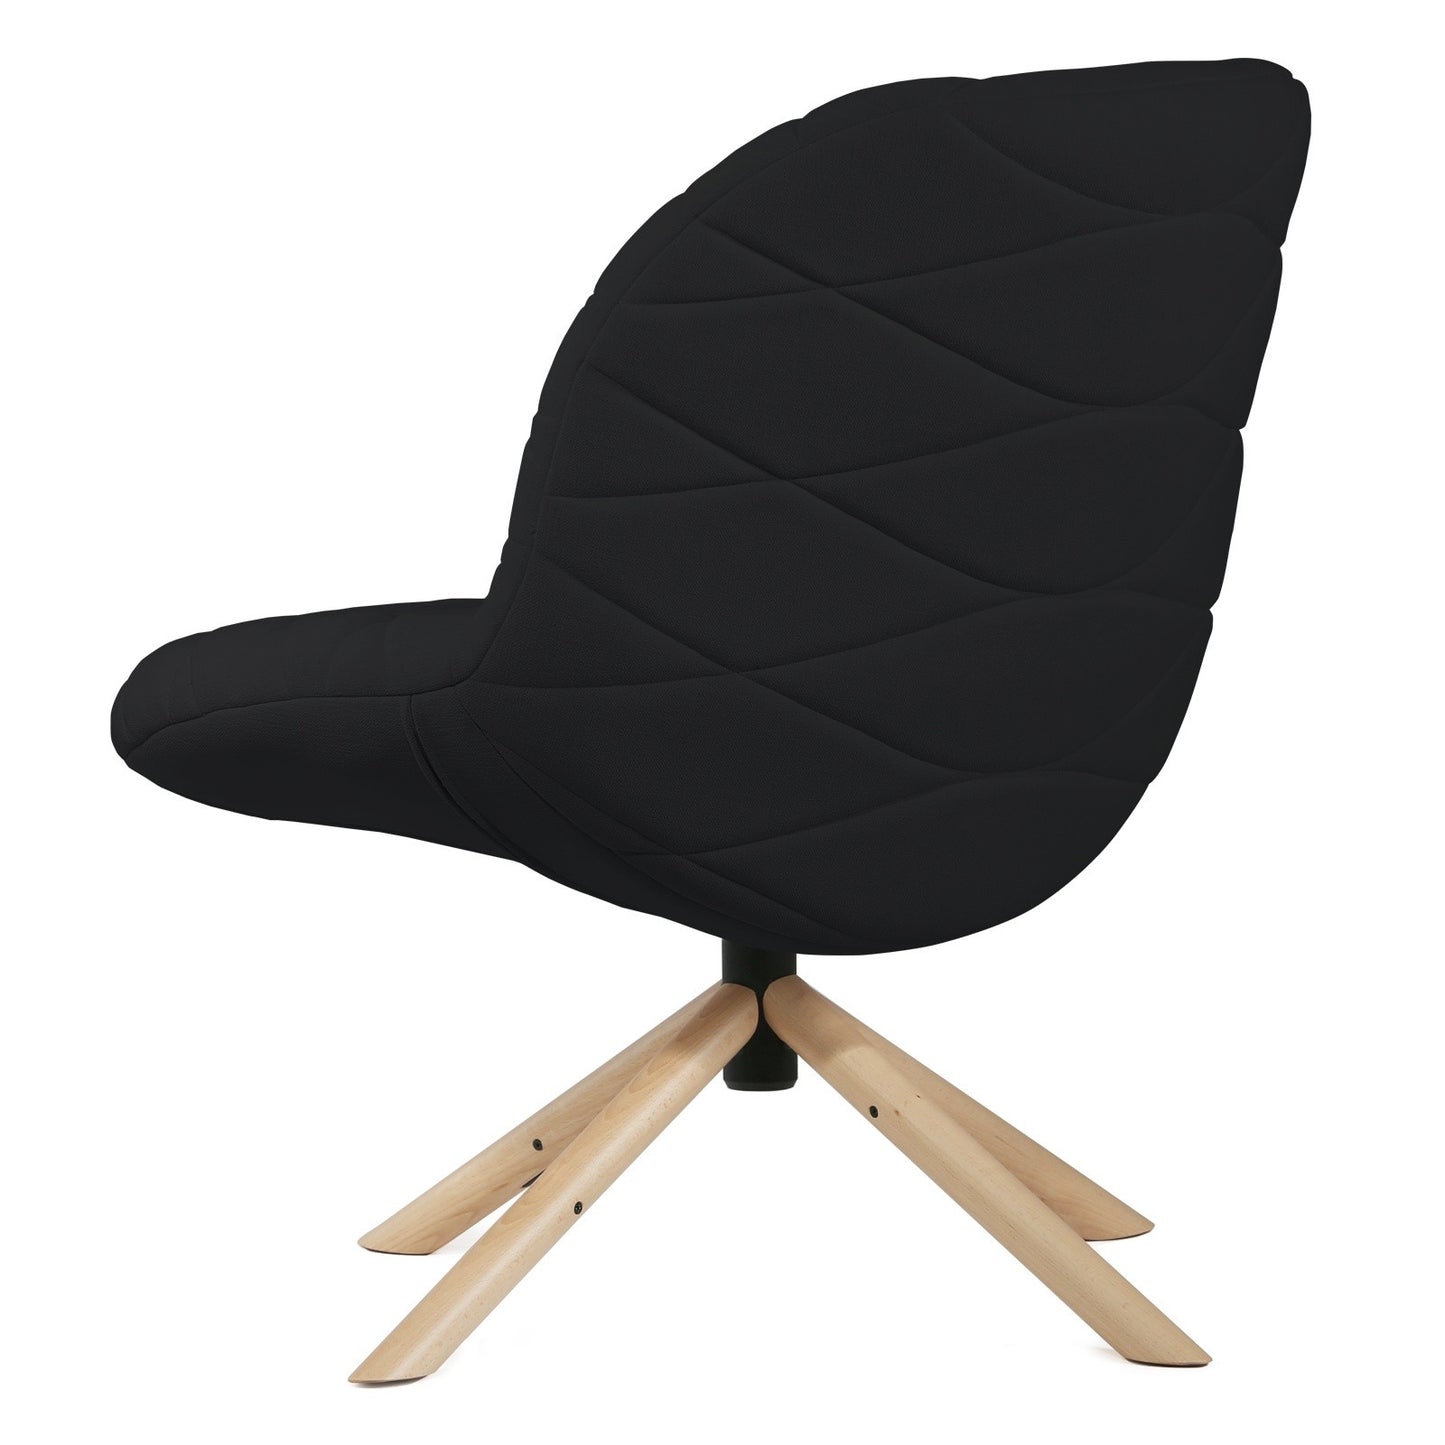 Lounge chair Mannequin Lounge 01 - Black